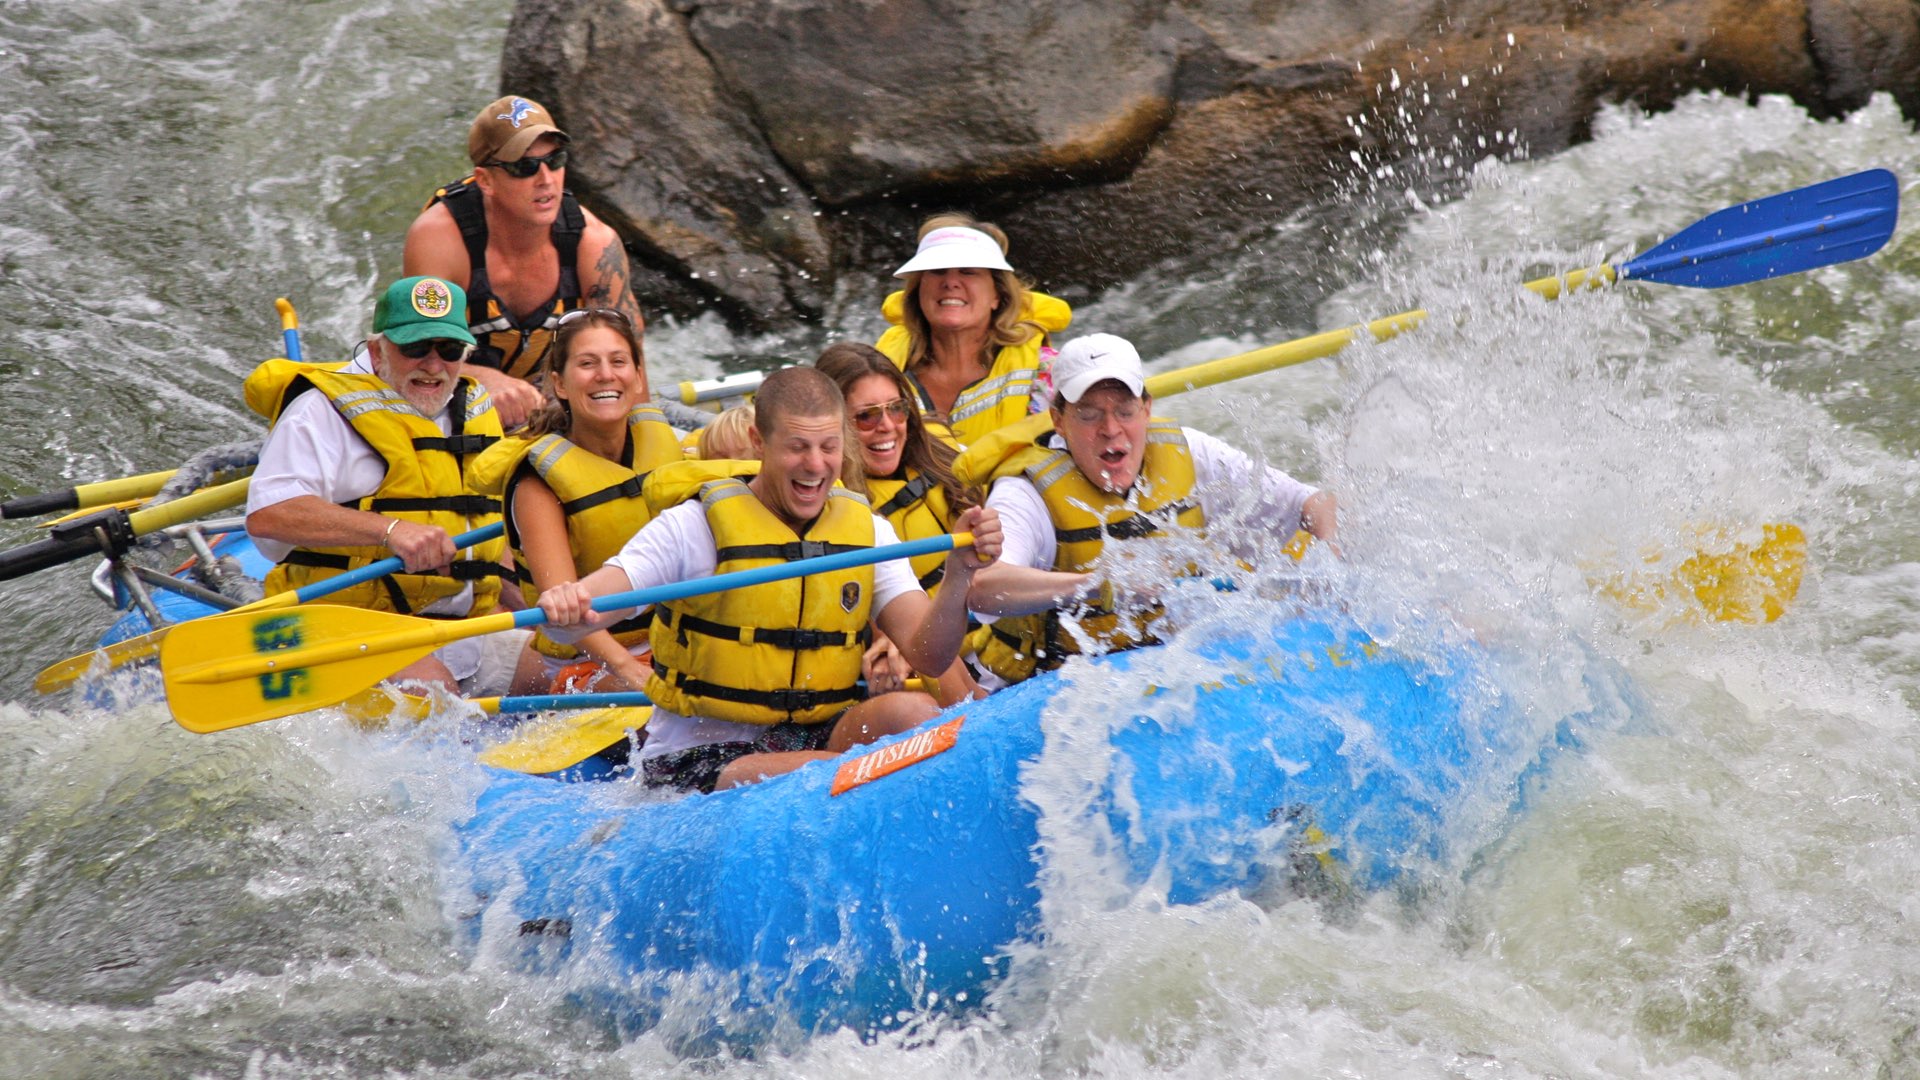 This captivating image showcases the excitement of a raft navigating through the exhilarating Shoshone Rapids.